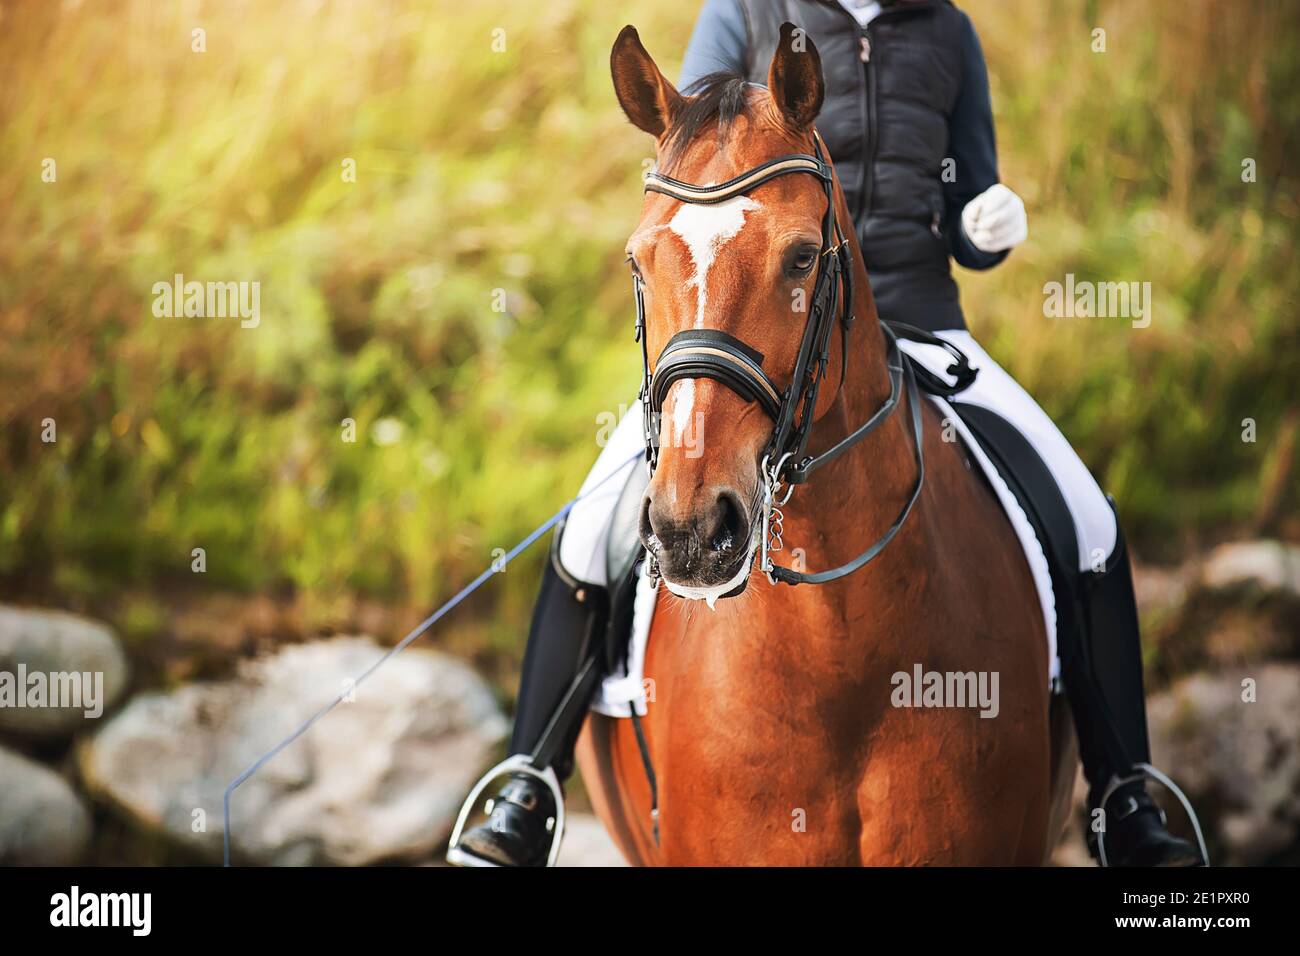 Portrait of a beautiful horse with a white spot on its forehead, in the saddle of which sits a rider holding a whip in his hand on a sunny summer day. Stock Photo